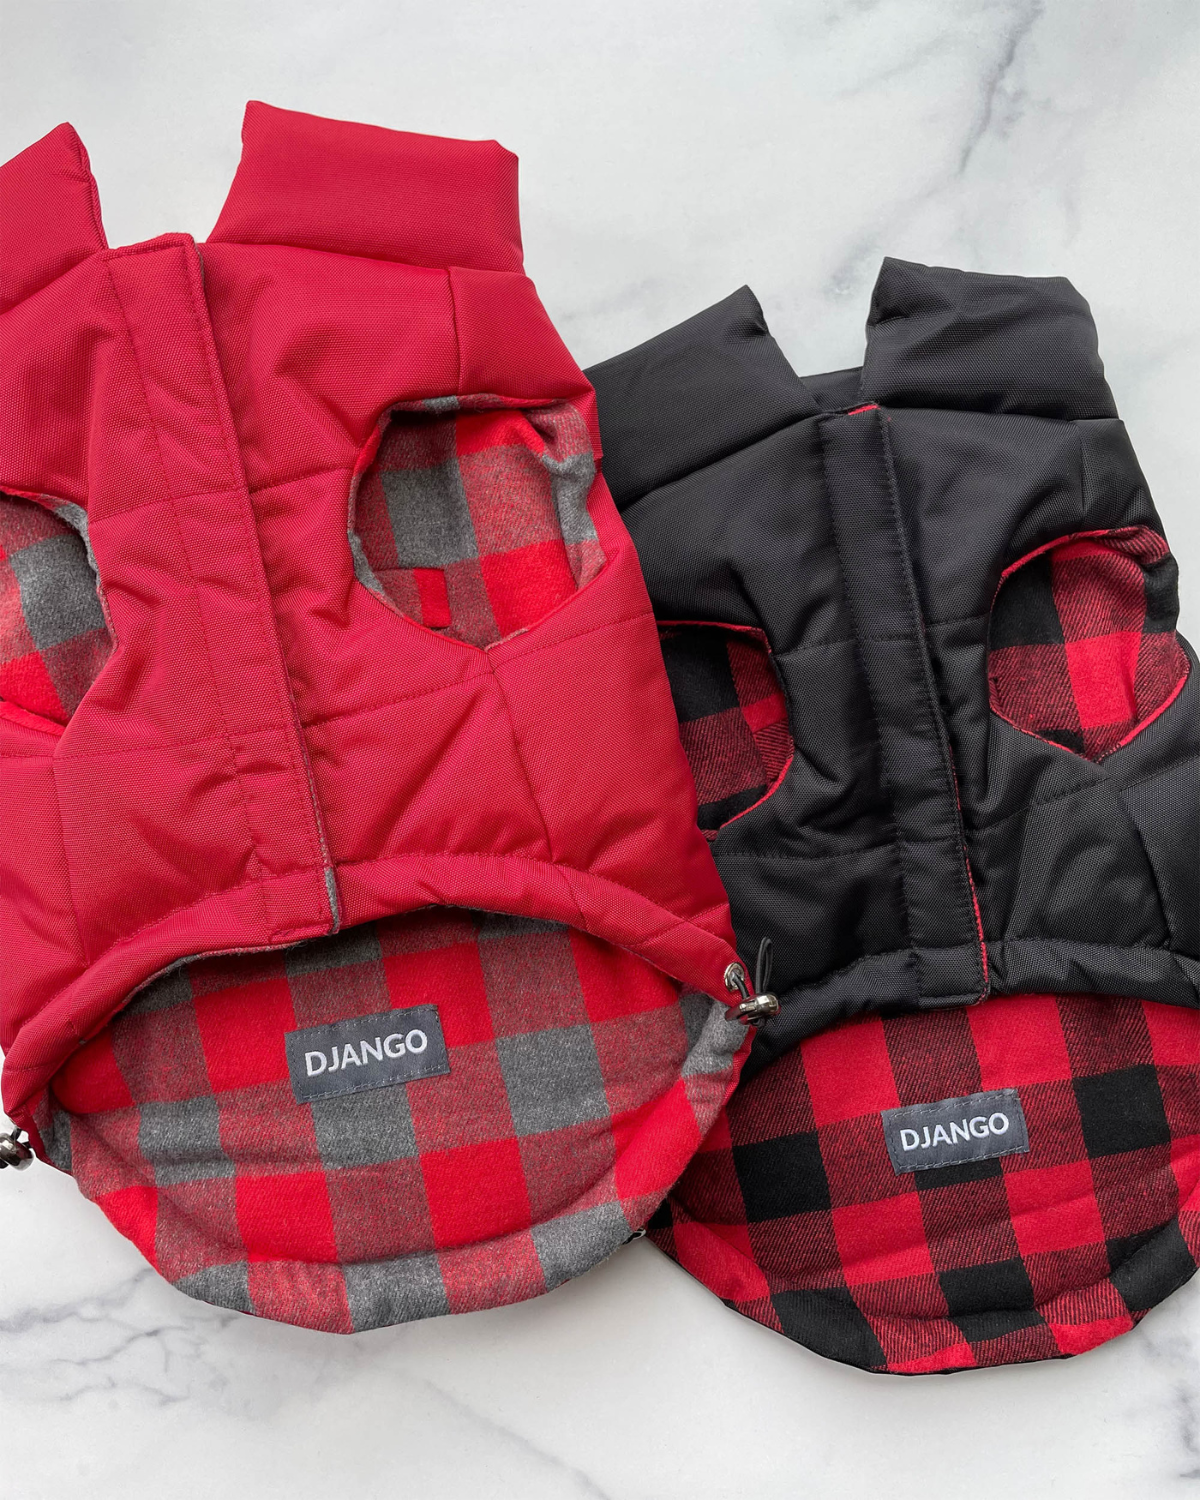 DJANGO's Reversible Puffer Dog Coat features a windproof, snowproof, and water-repellent exterior and a super soft and cozy plaid interior lining. Reversible? Yes! Wear your DJANGO puffer coat 2 ways for double the style. - djangobrand.com